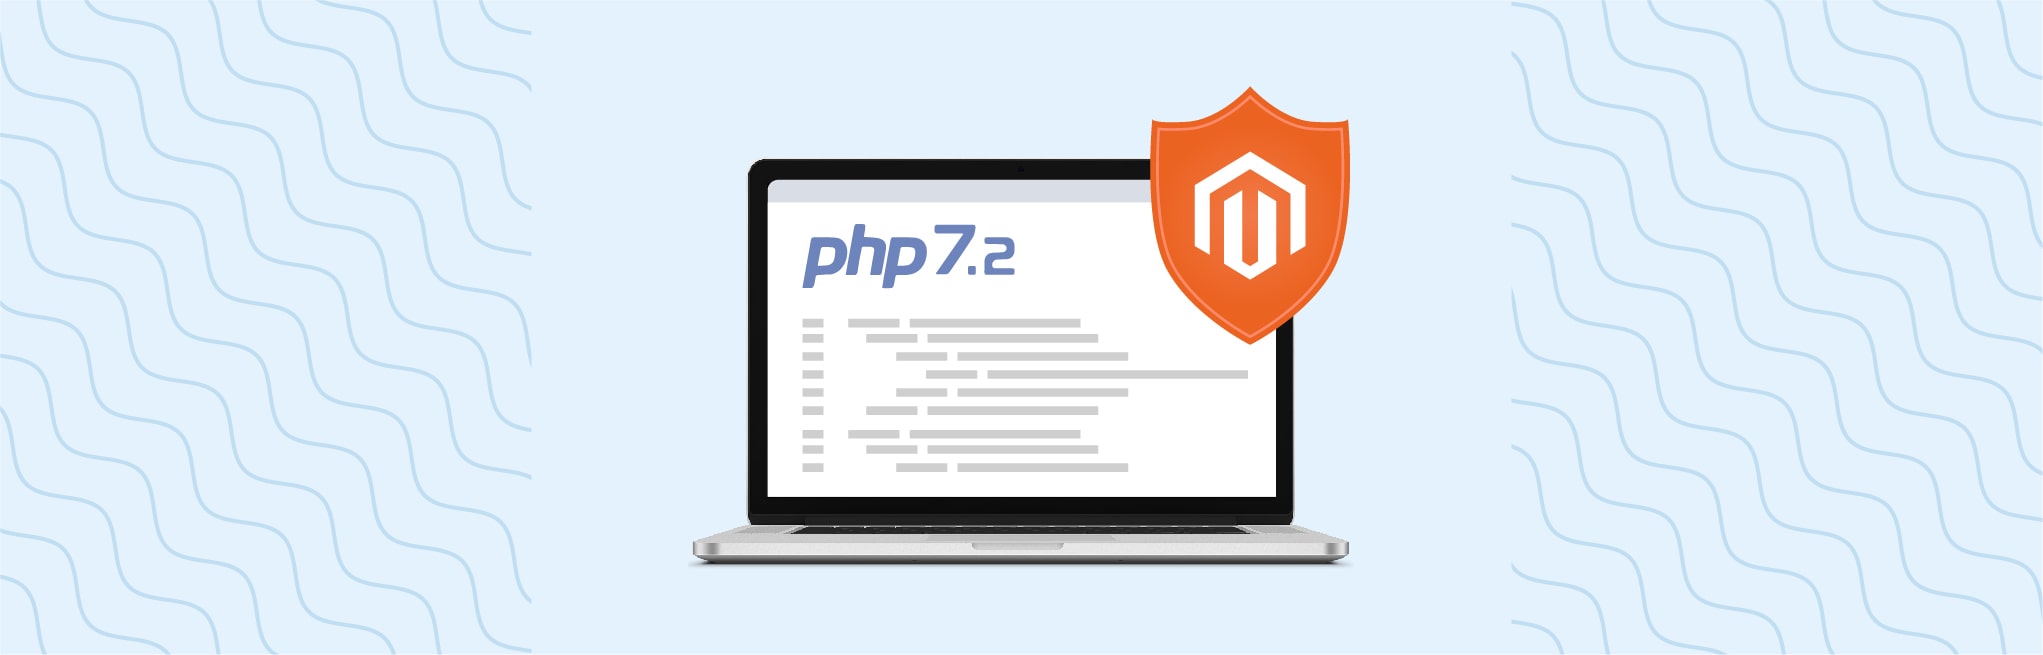 What are the main benefits of the all new PHP 7.2 for Magento sites?